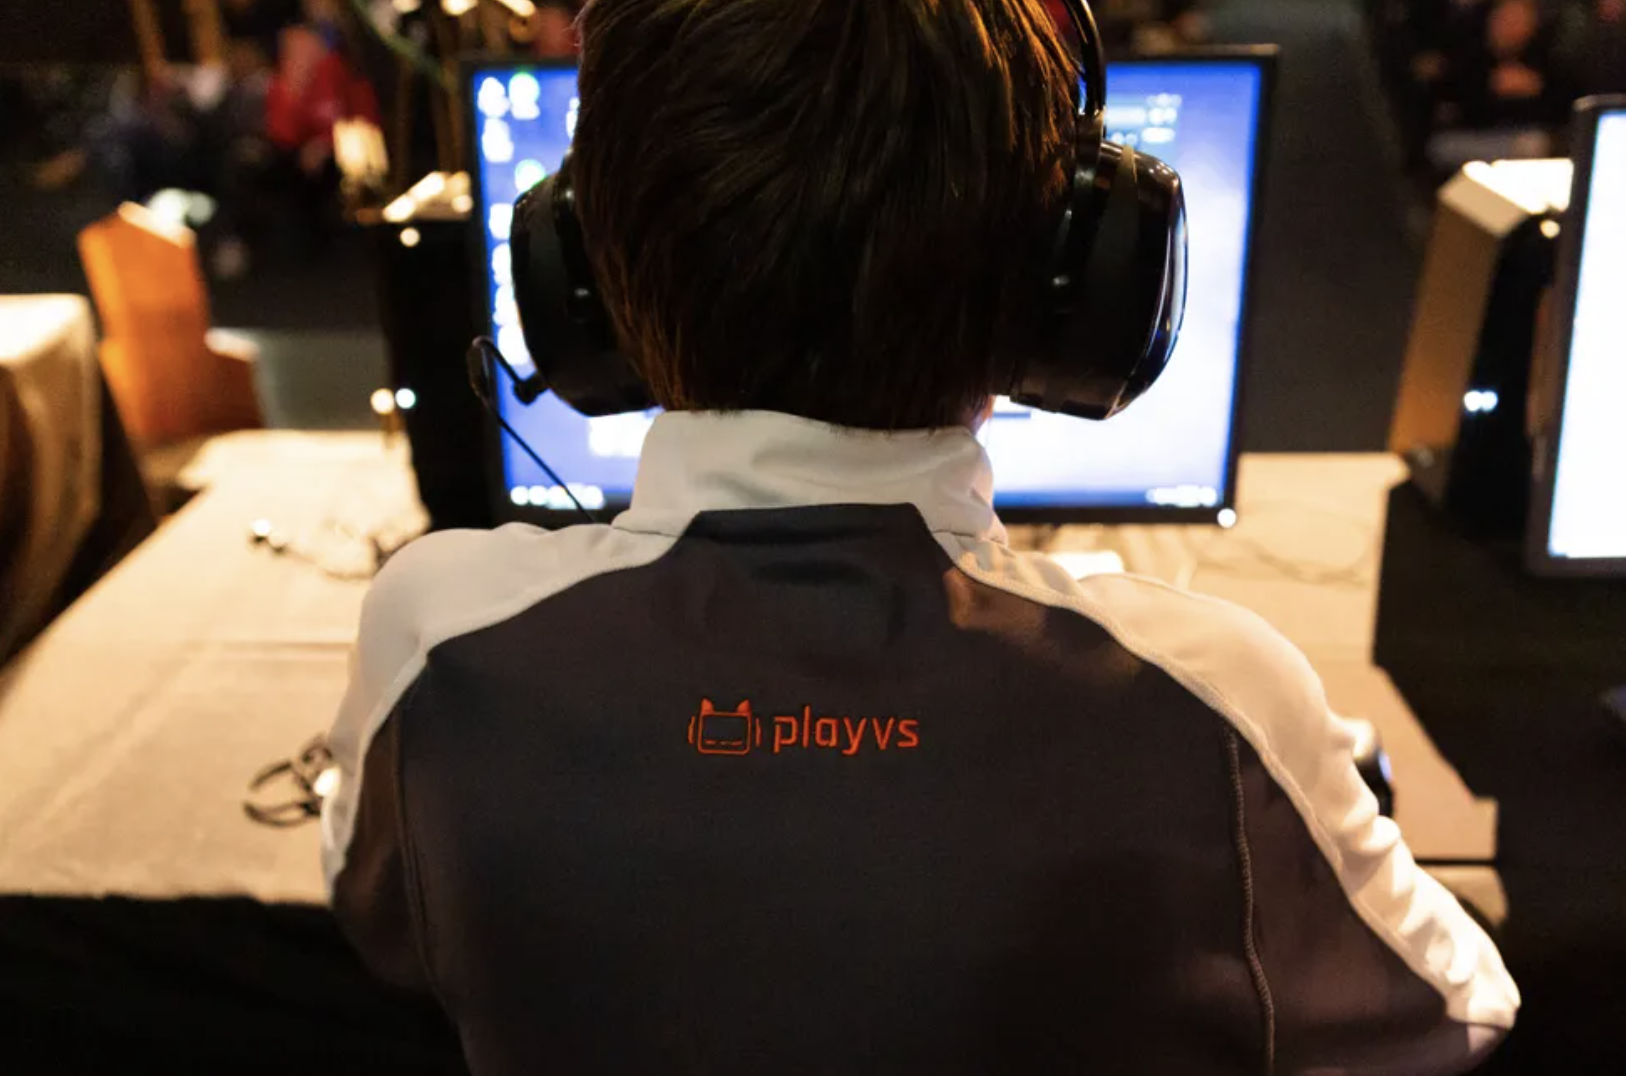 With Most High School Sports Sidelined, Esports Is Having a Moment in the Spotlight